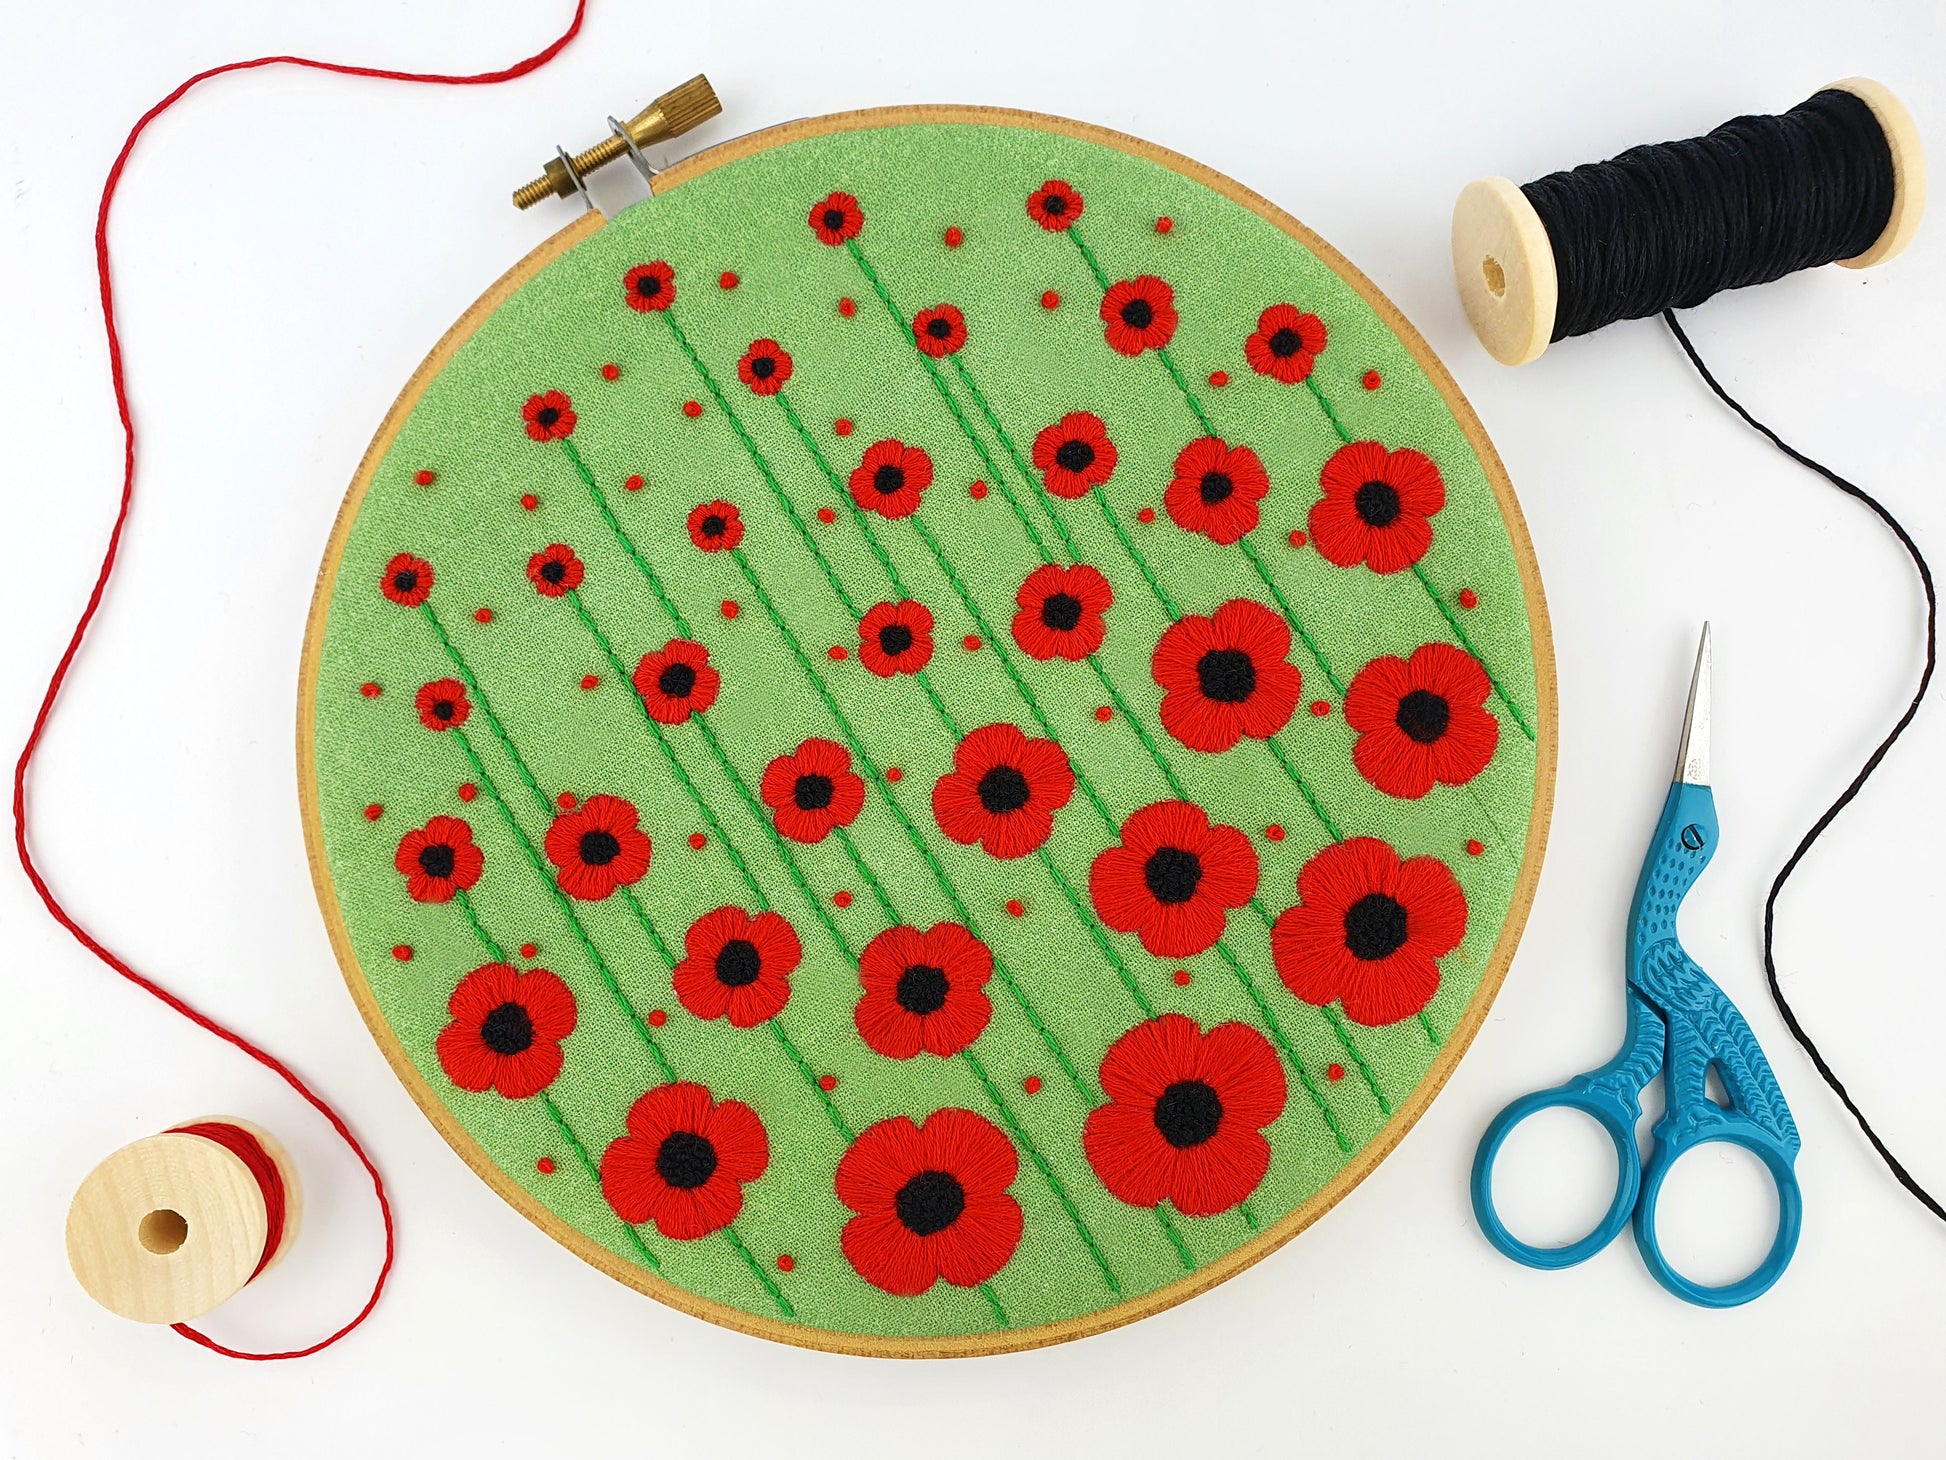 Poppy Field Embroidery Kit - Embroidery Kits - ohsewbootiful